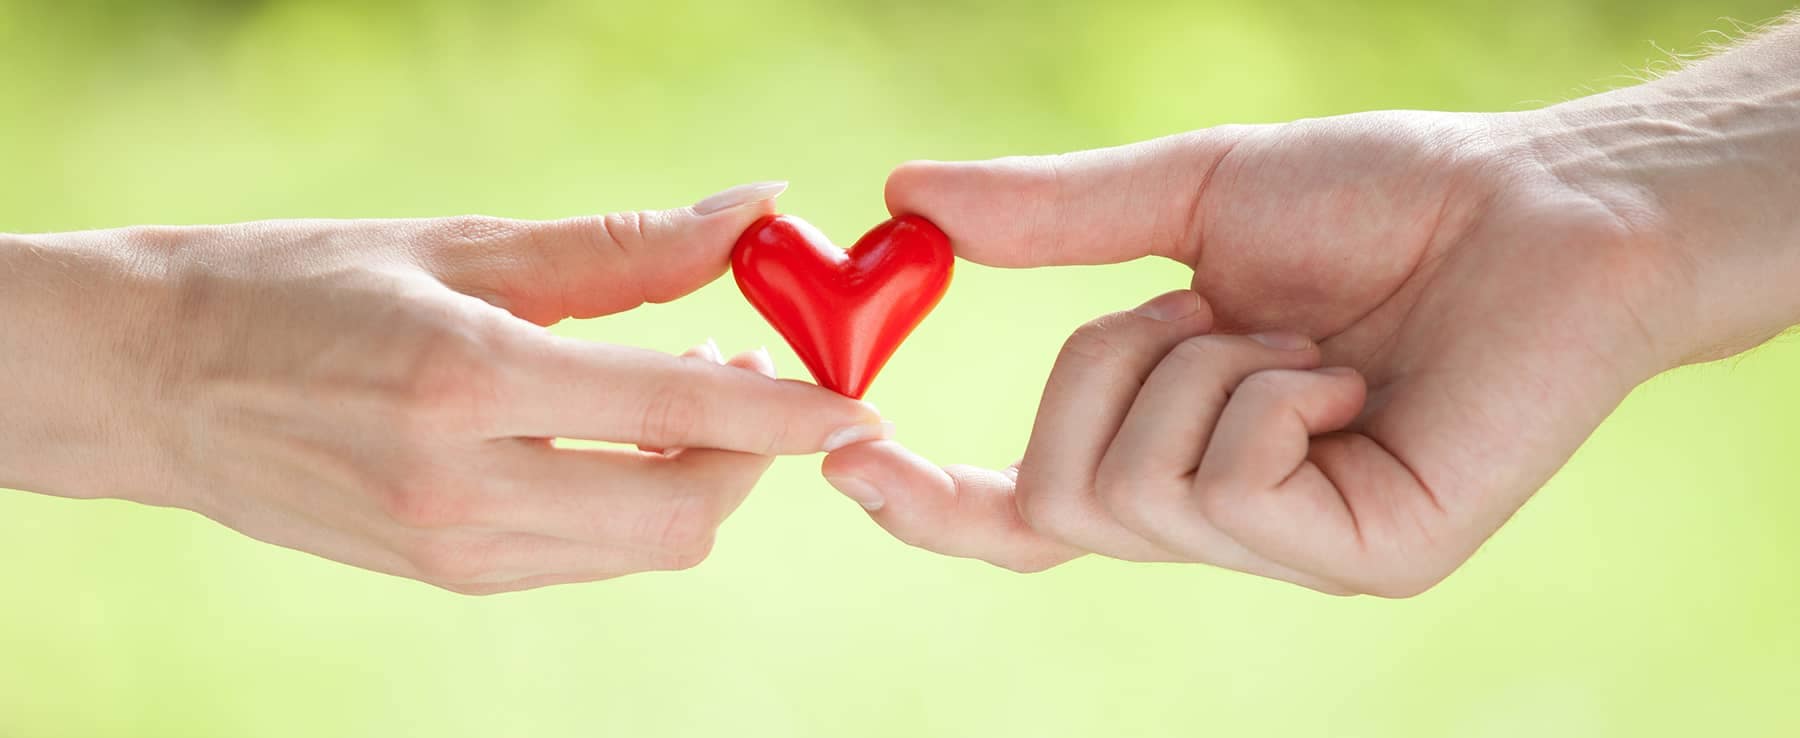 two people's hands holding a small heart